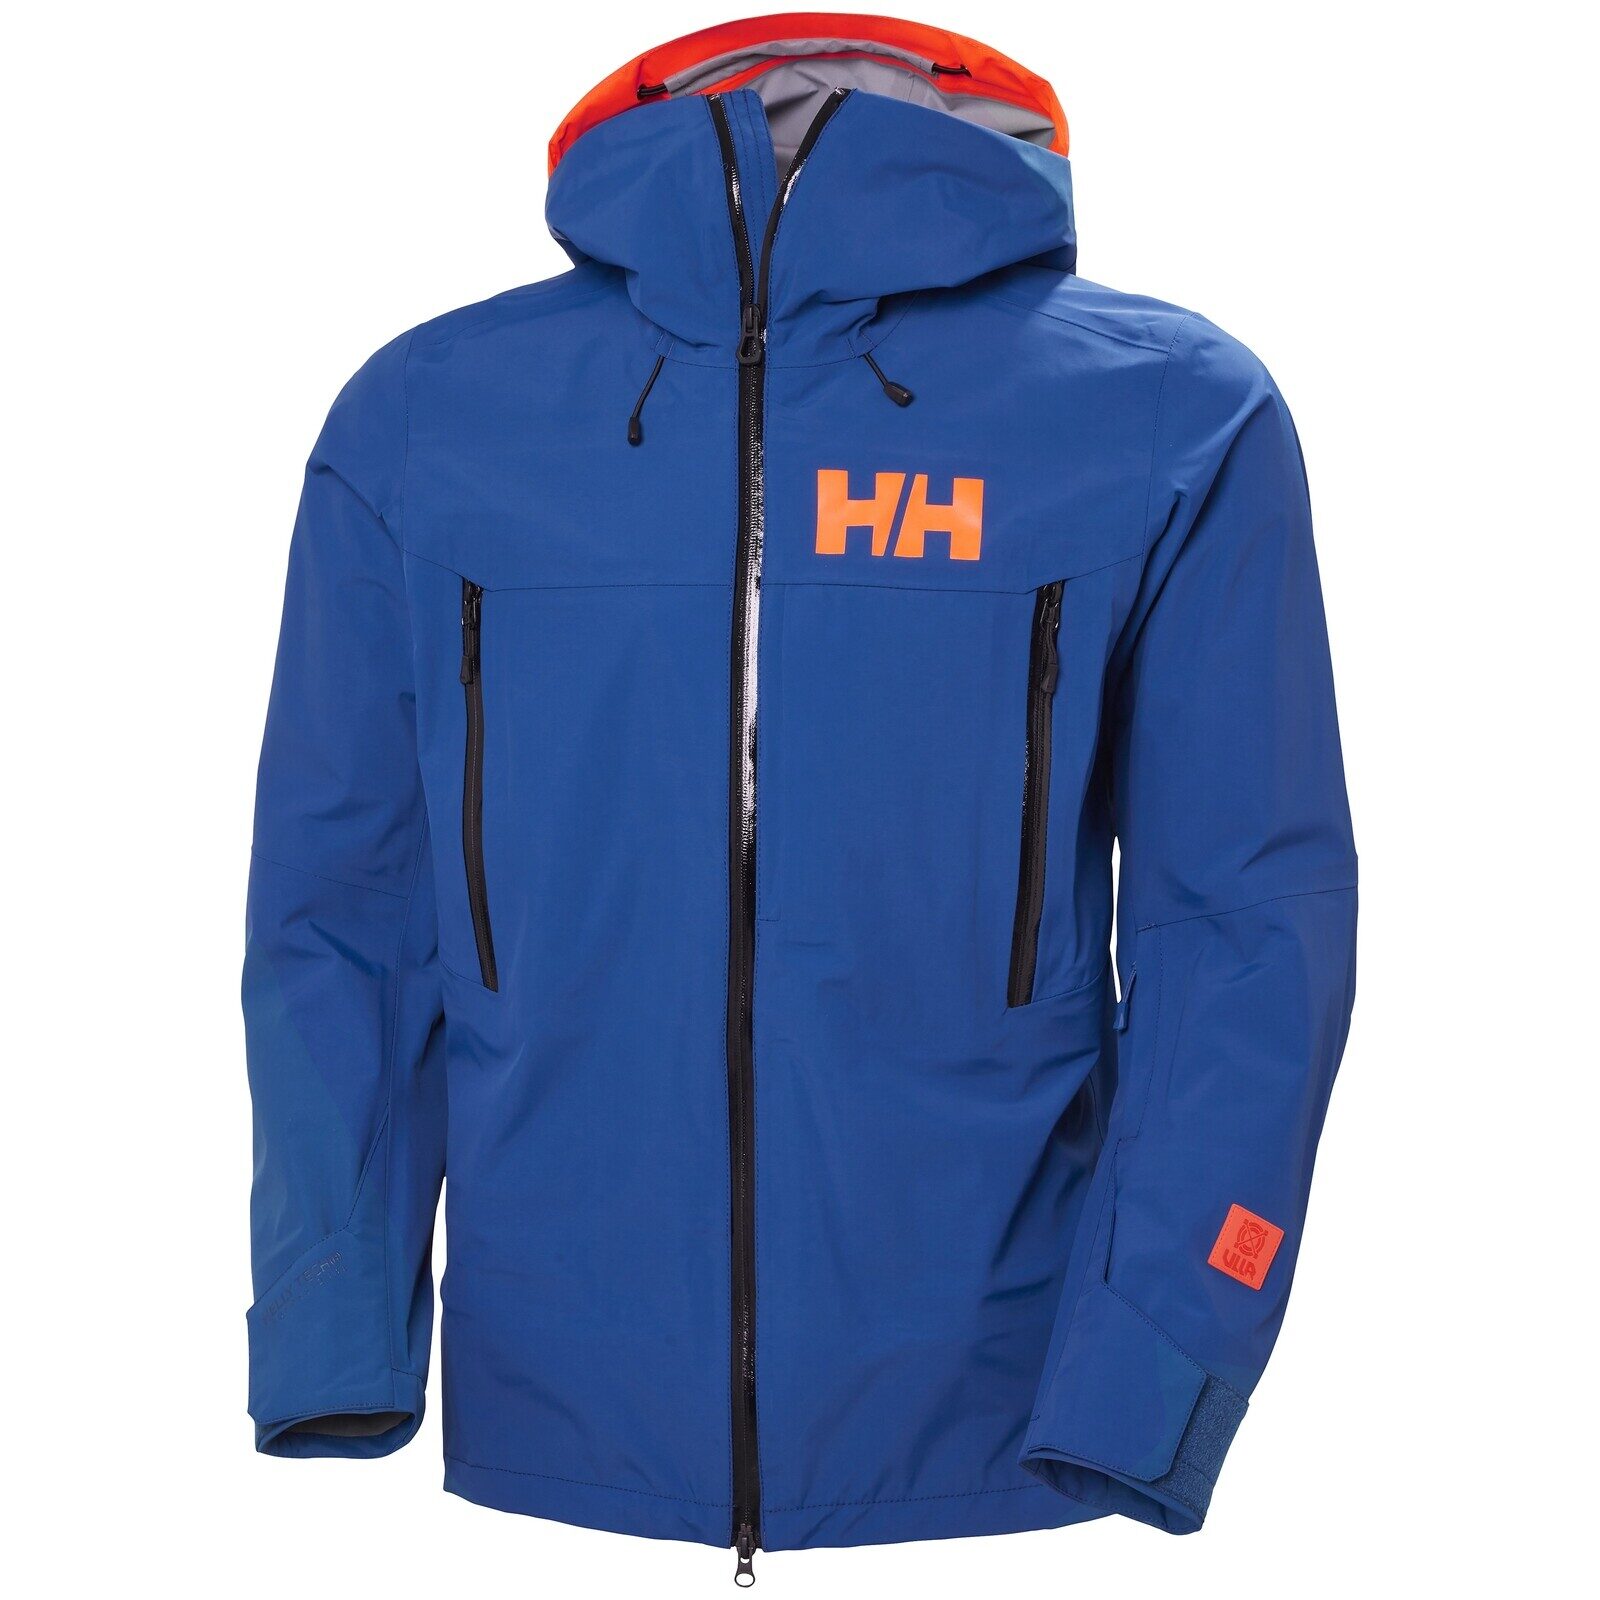 Adulto Helly Hansen Giacca Giacca Softshell Unisex 